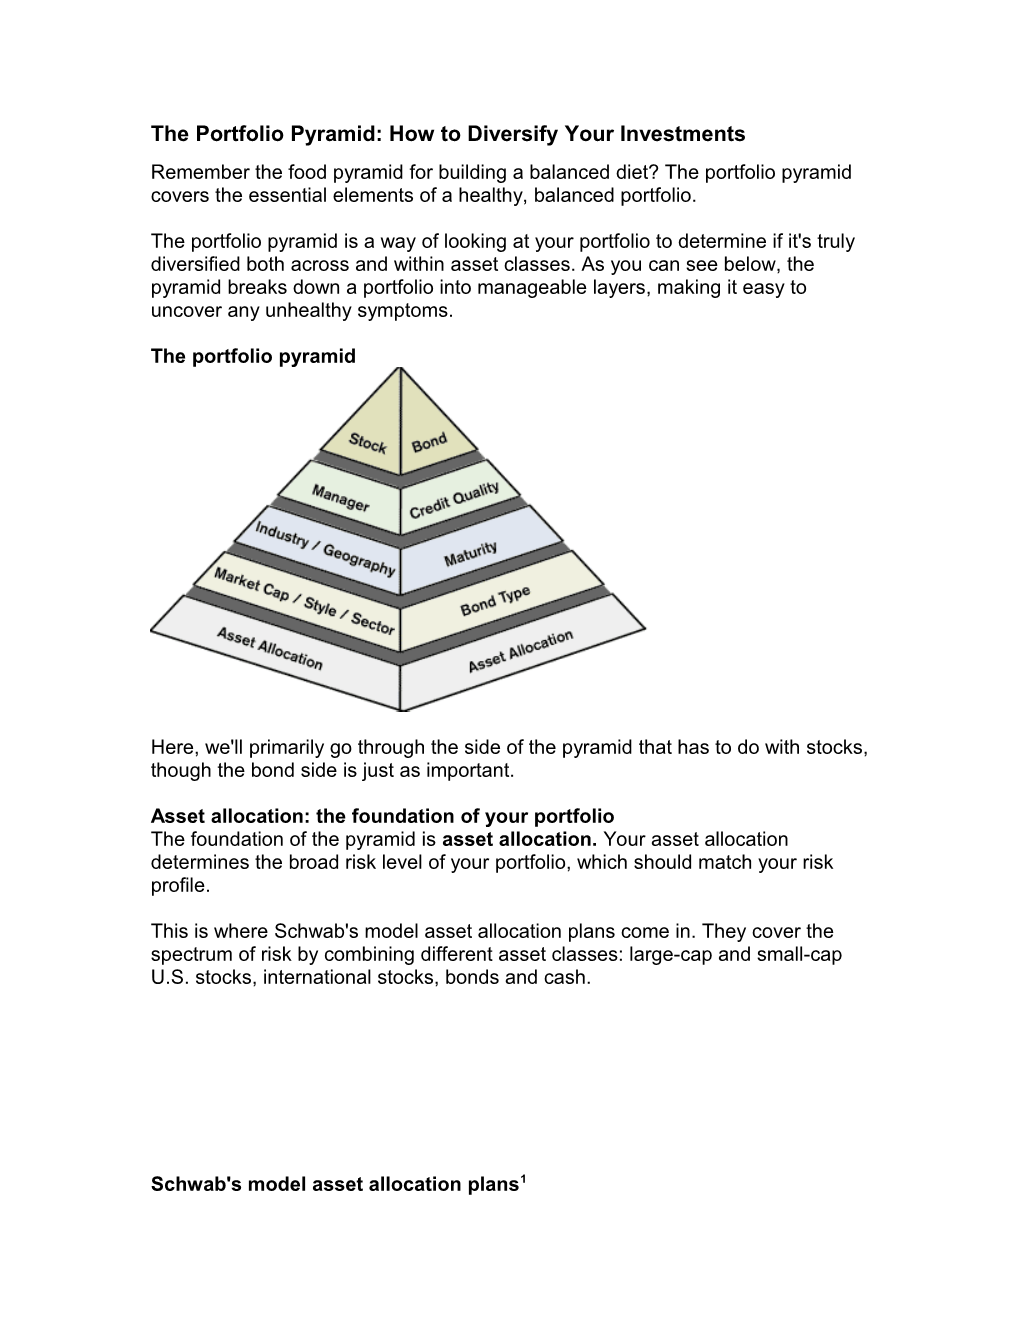 The Portfolio Pyramid: How to Diversify Your Investments